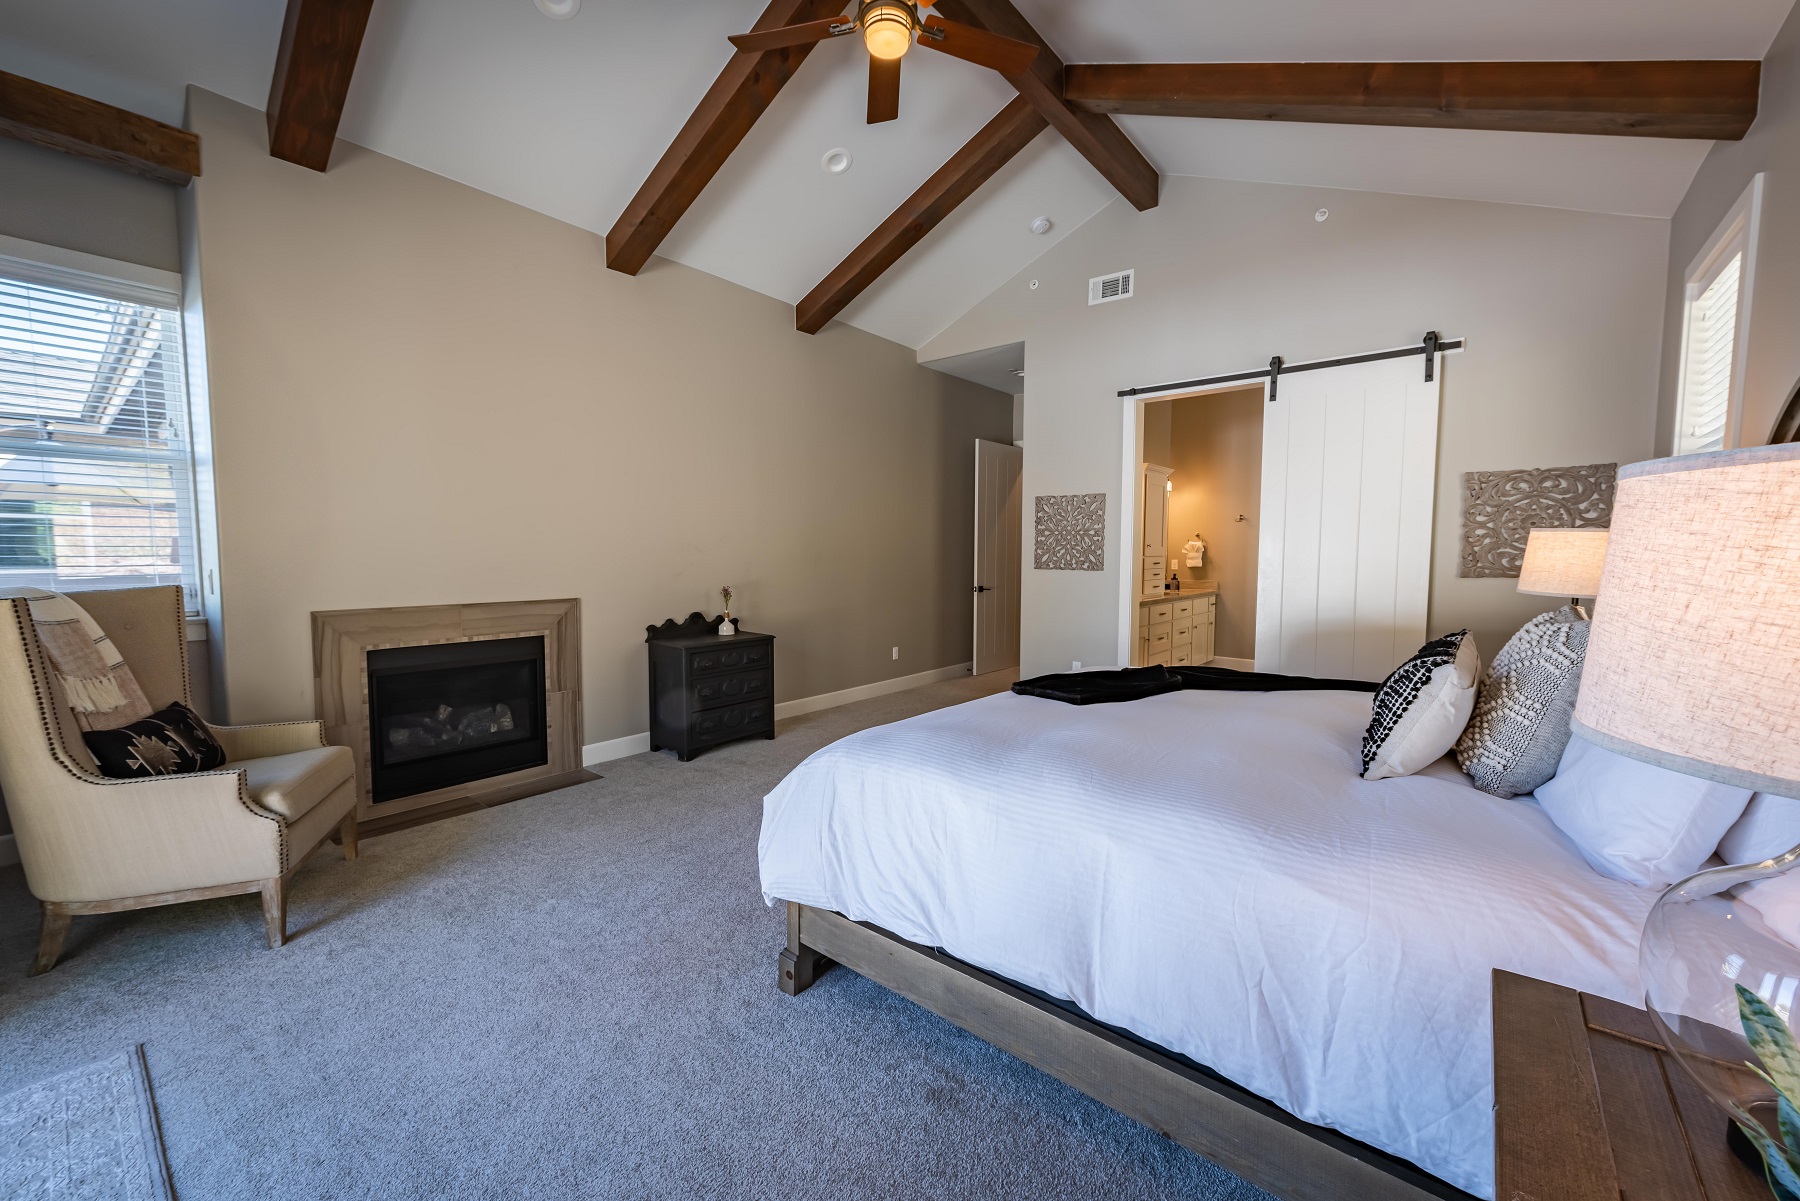 Master bedroom with wood beamed vaulted ceiling